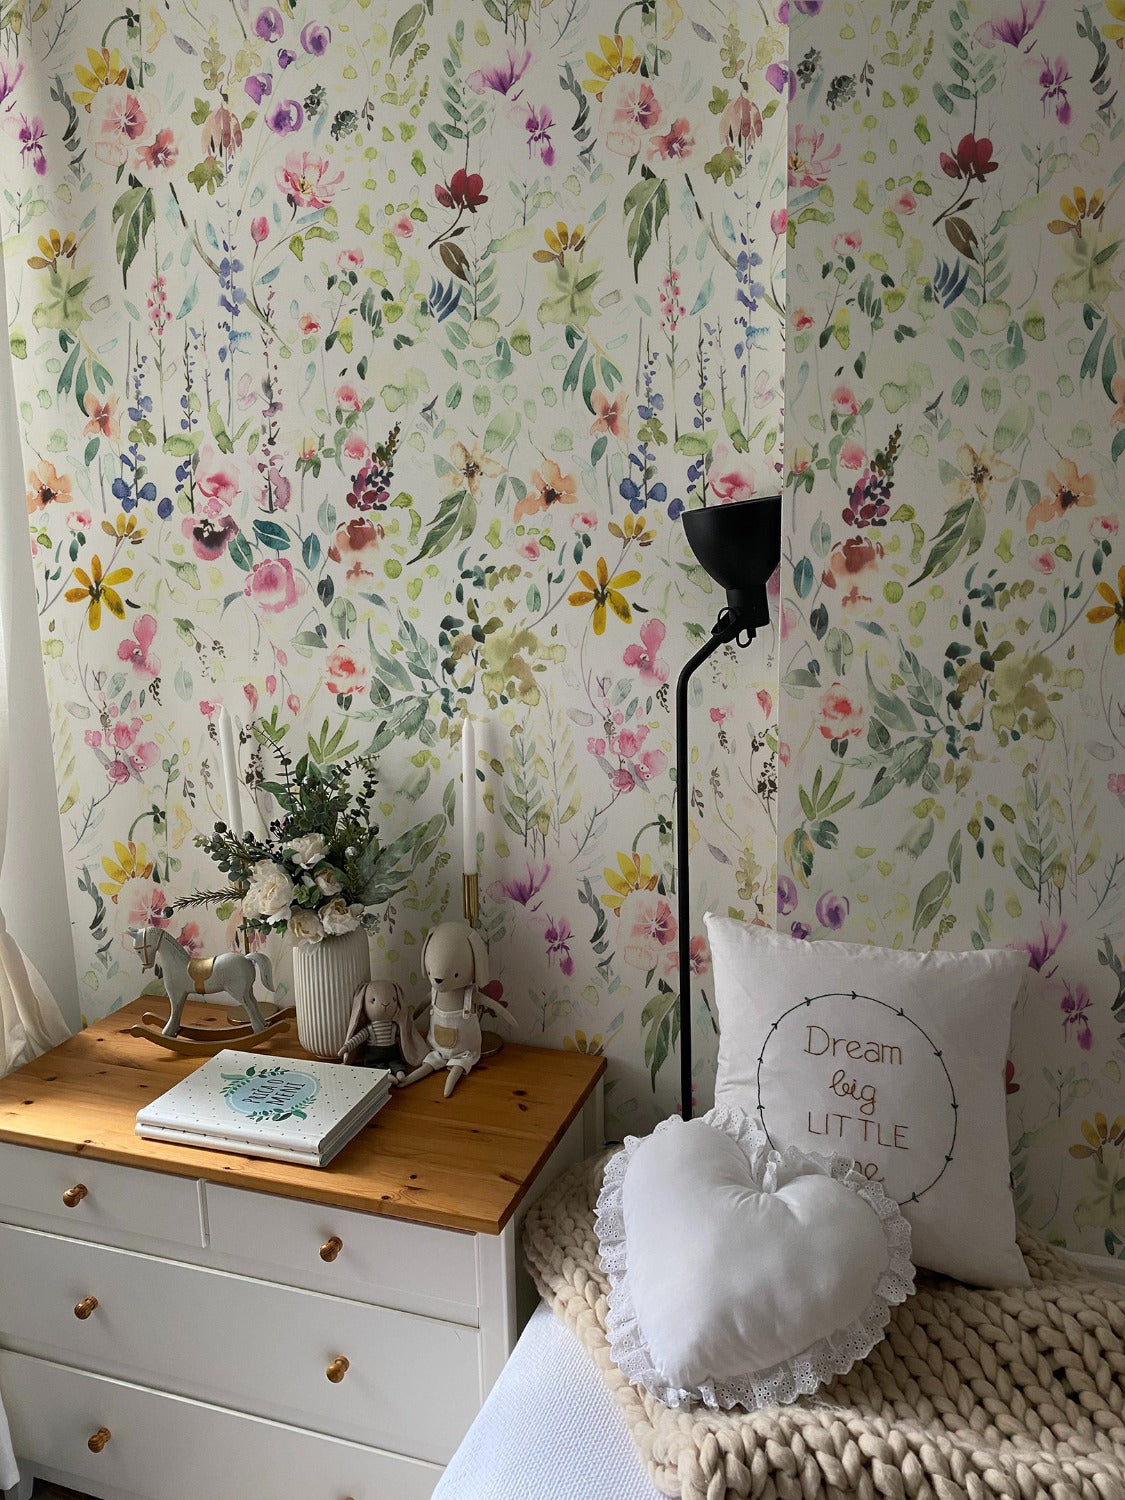 A heartwarming and whimsical children's room adorned with Hera's Floral Wallpaper, where delicate flowers mingle with soft furnishings and playful decor to create an enchanting space for little ones to dream and play.